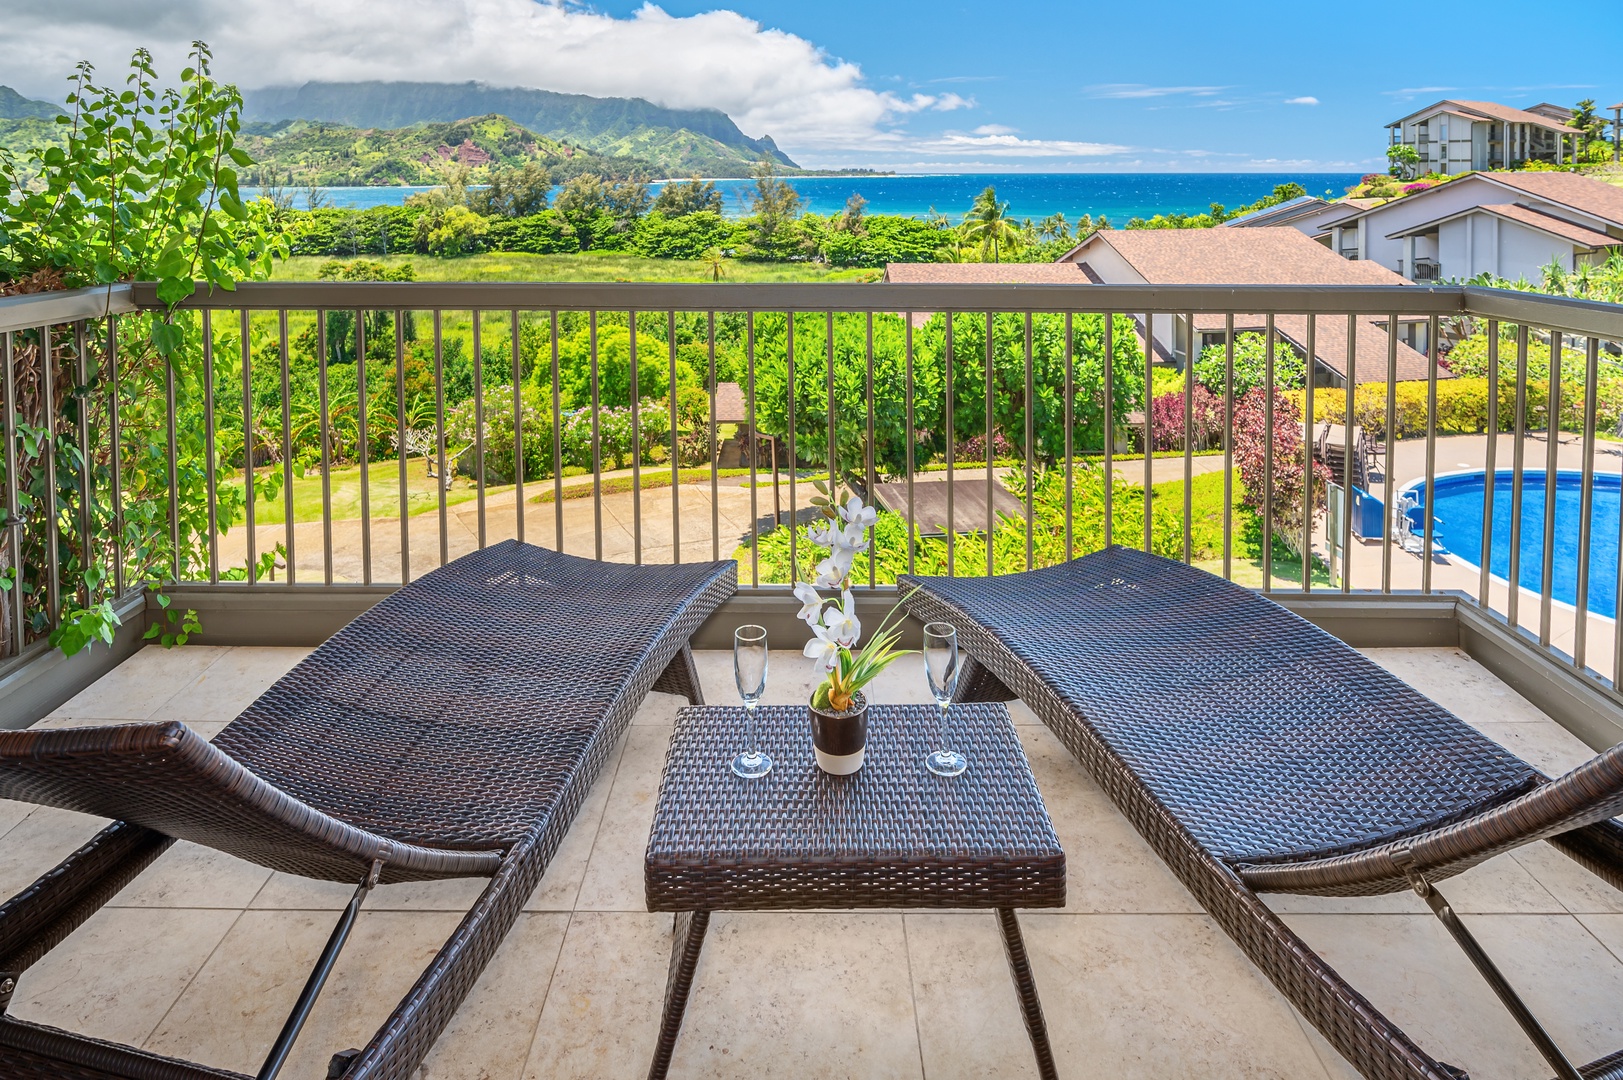 Princeville Vacation Rentals, Hanalei Bay Resort 7307/08 - Lanai off of the primary bedroom will let you enjoy this stunning view